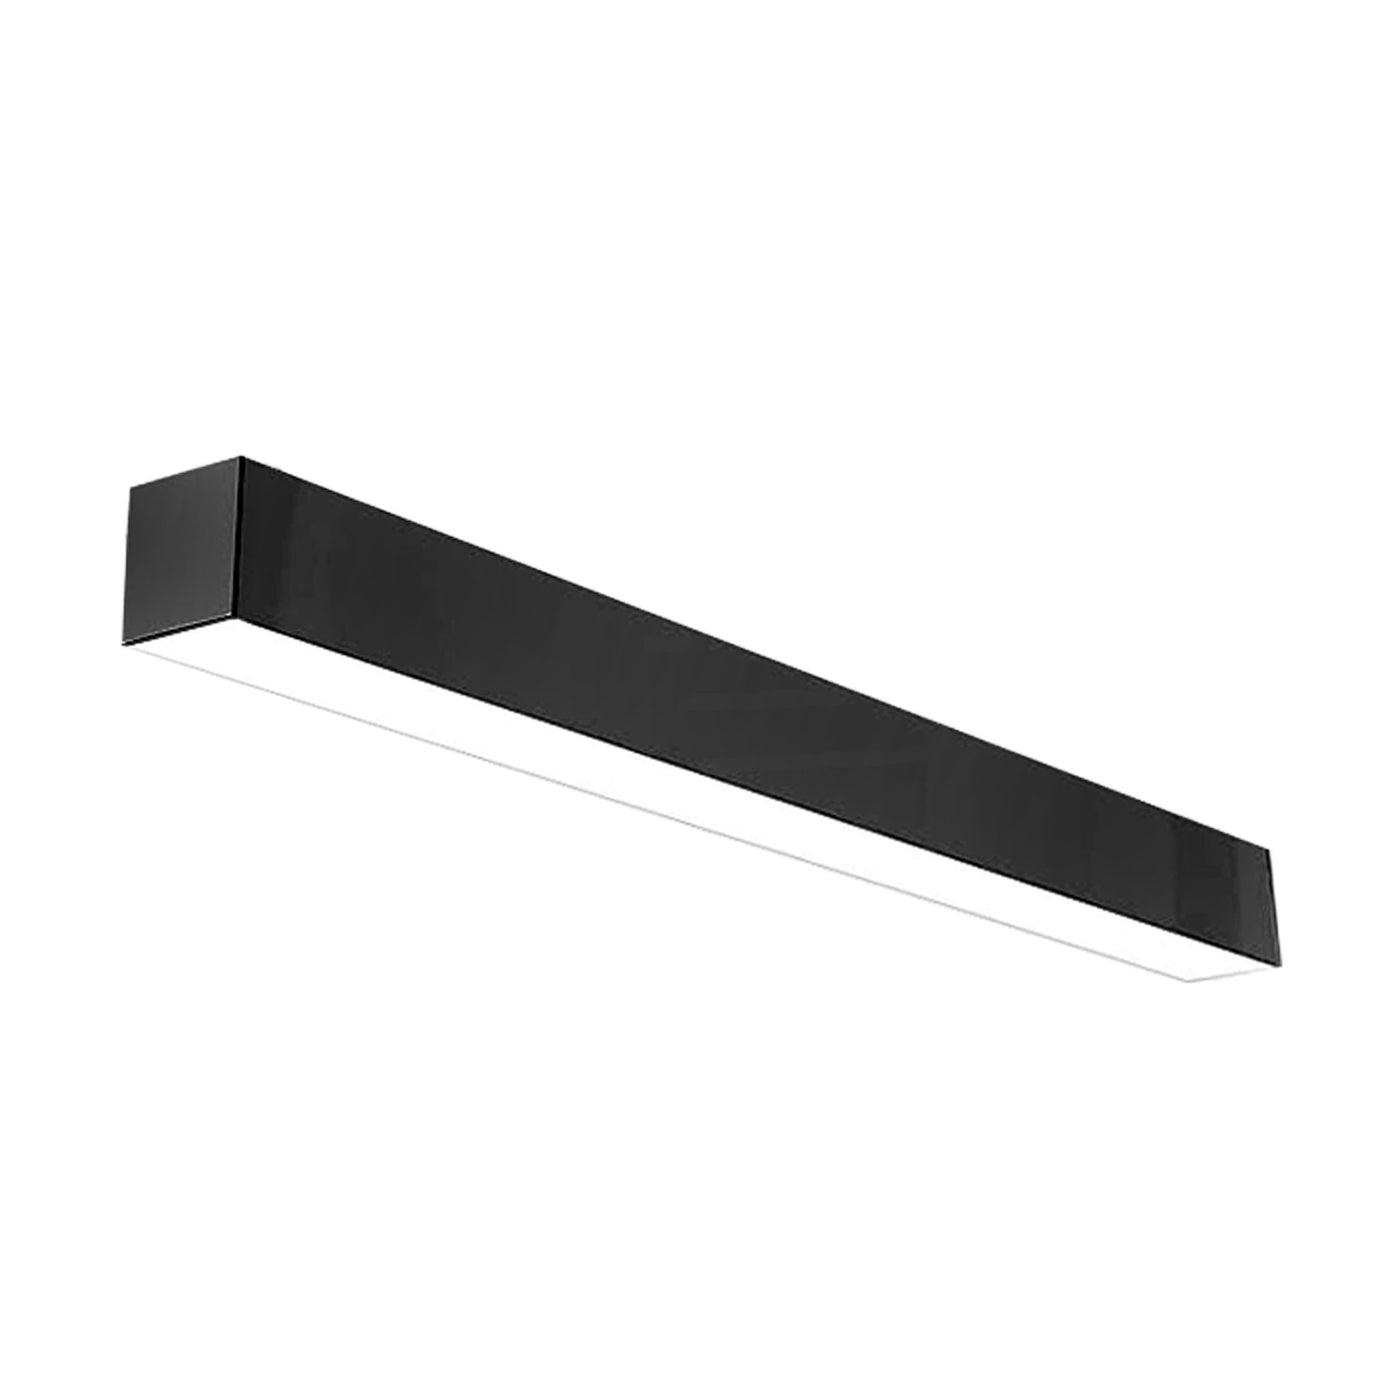 4 FT LED Direct/Indirect Suspended Linear Fixture G2, 6900 Lumen Max, Wattage and CCT Selectable, 120-277V, Black Finish